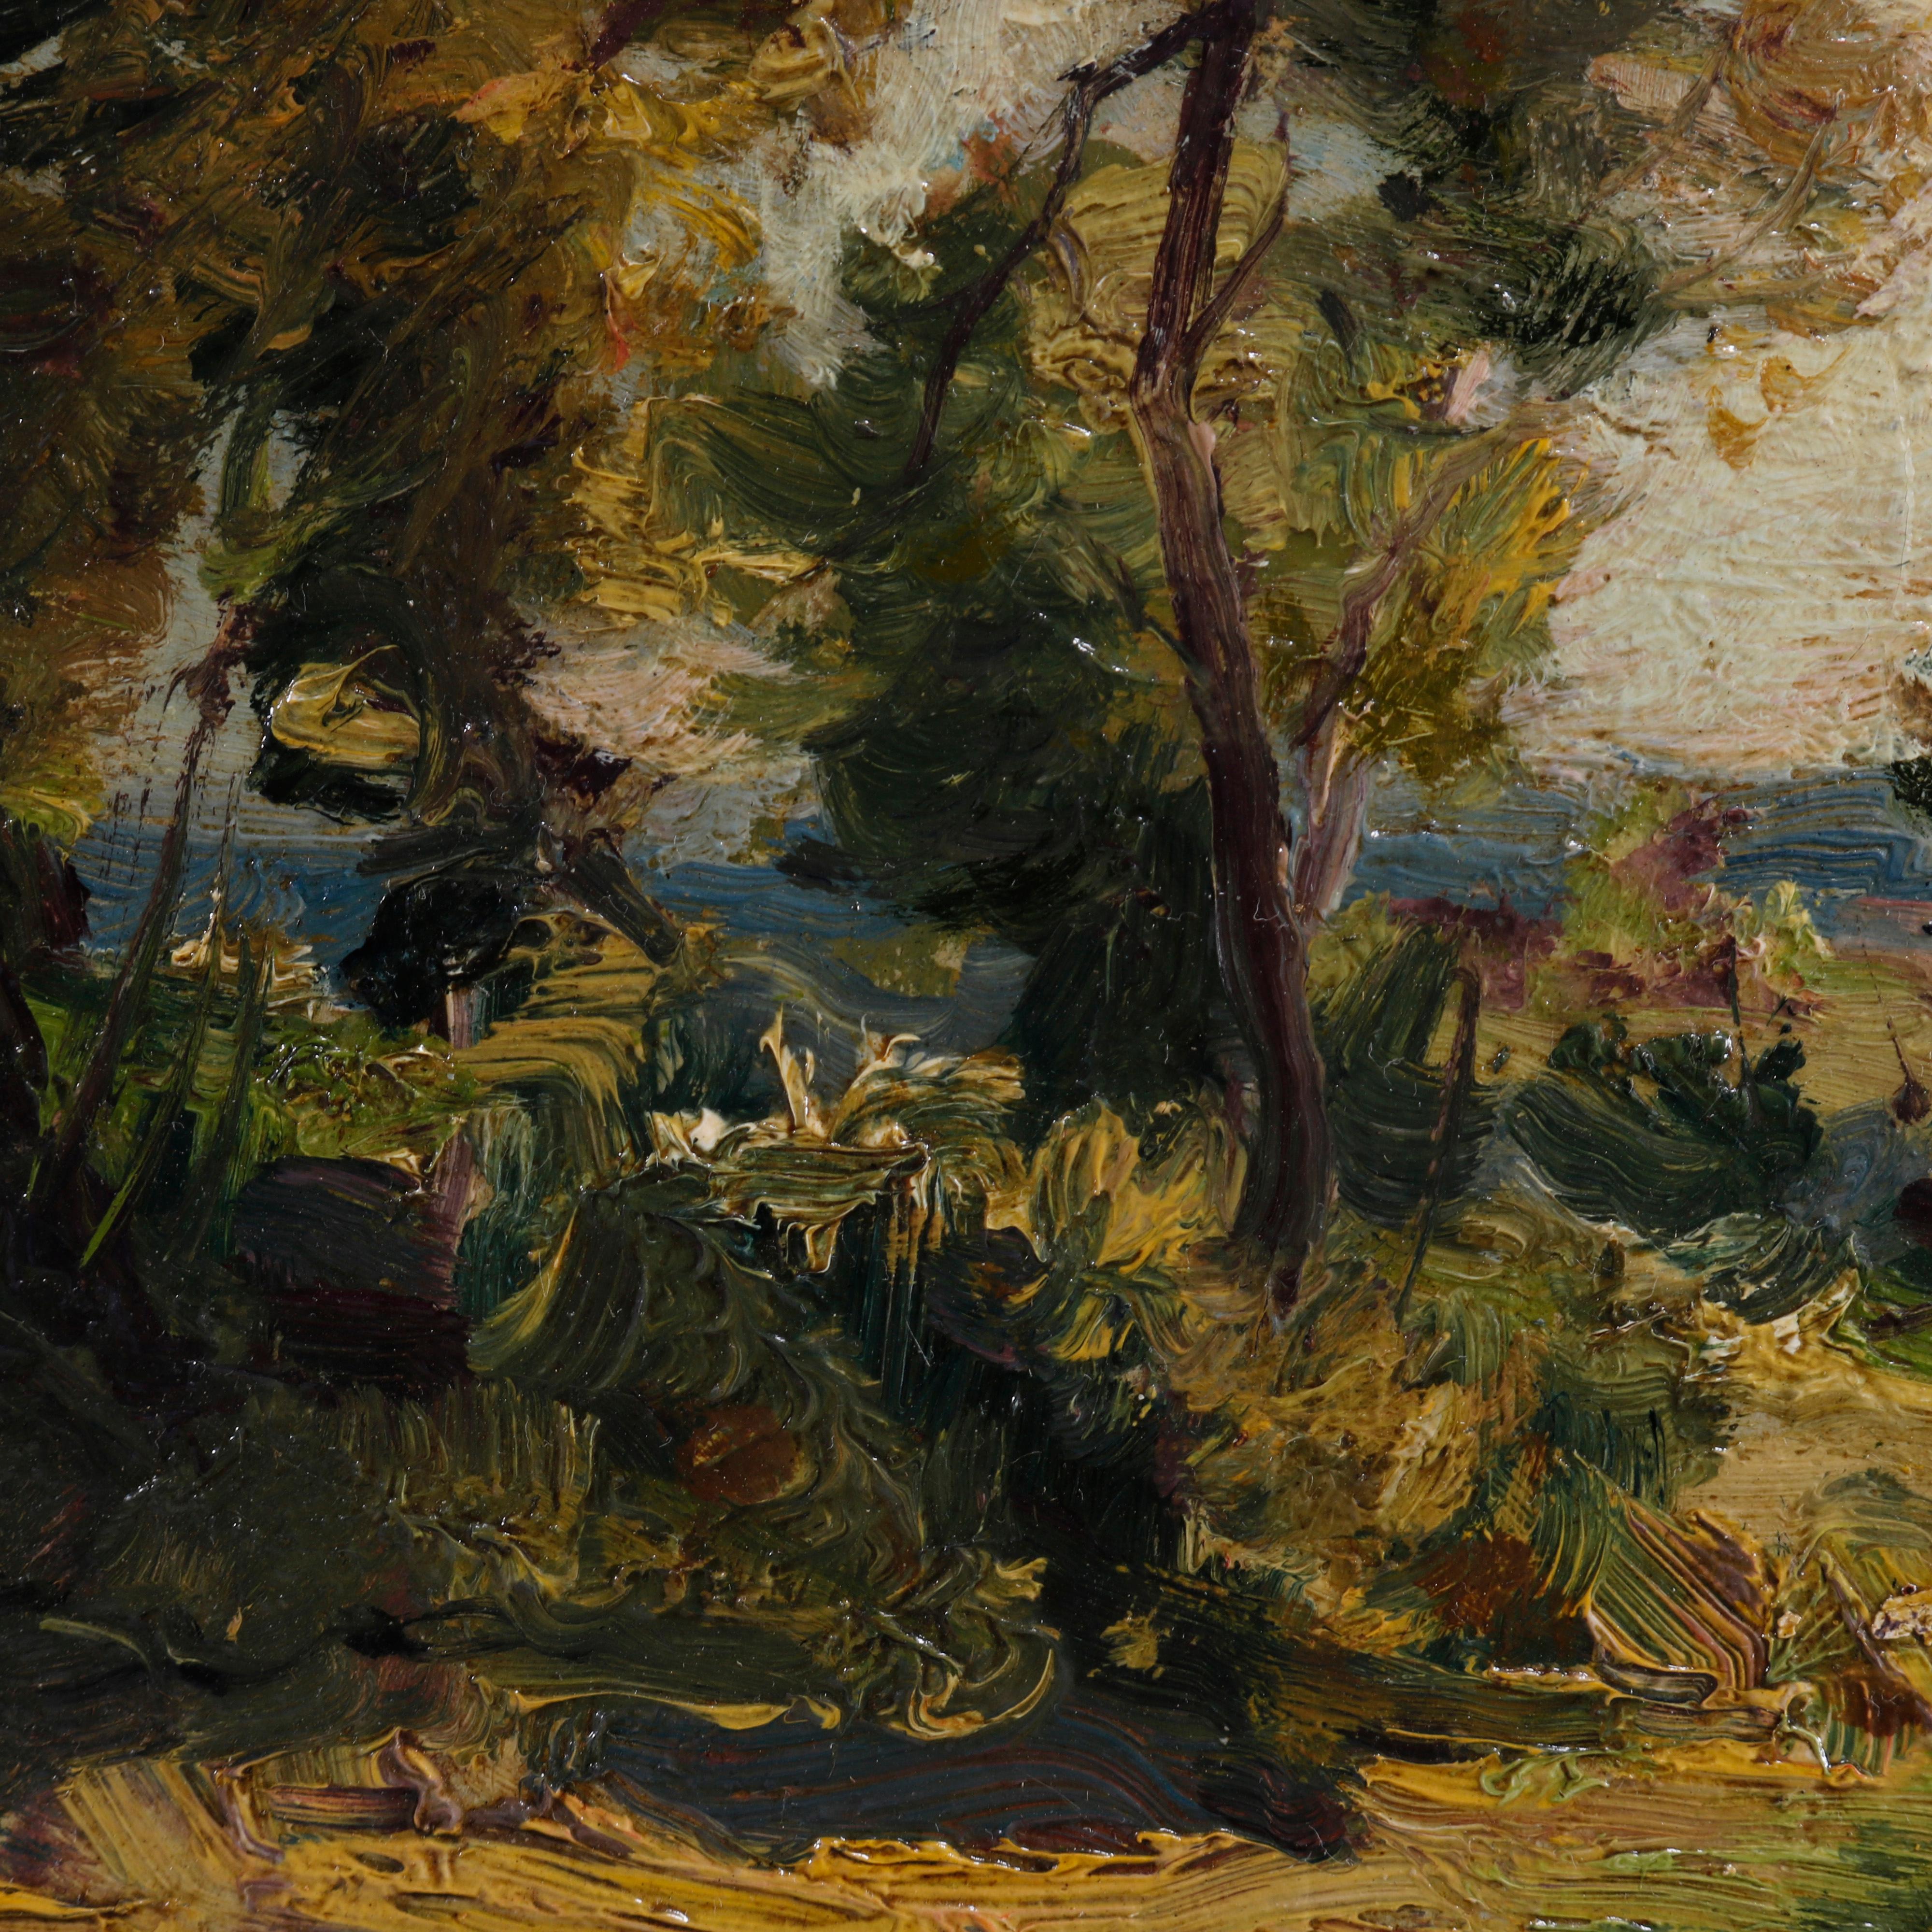 Hand-Painted Antique Impressionist Painting Landscape with Figure, Signed A. Addy, Circa 1910